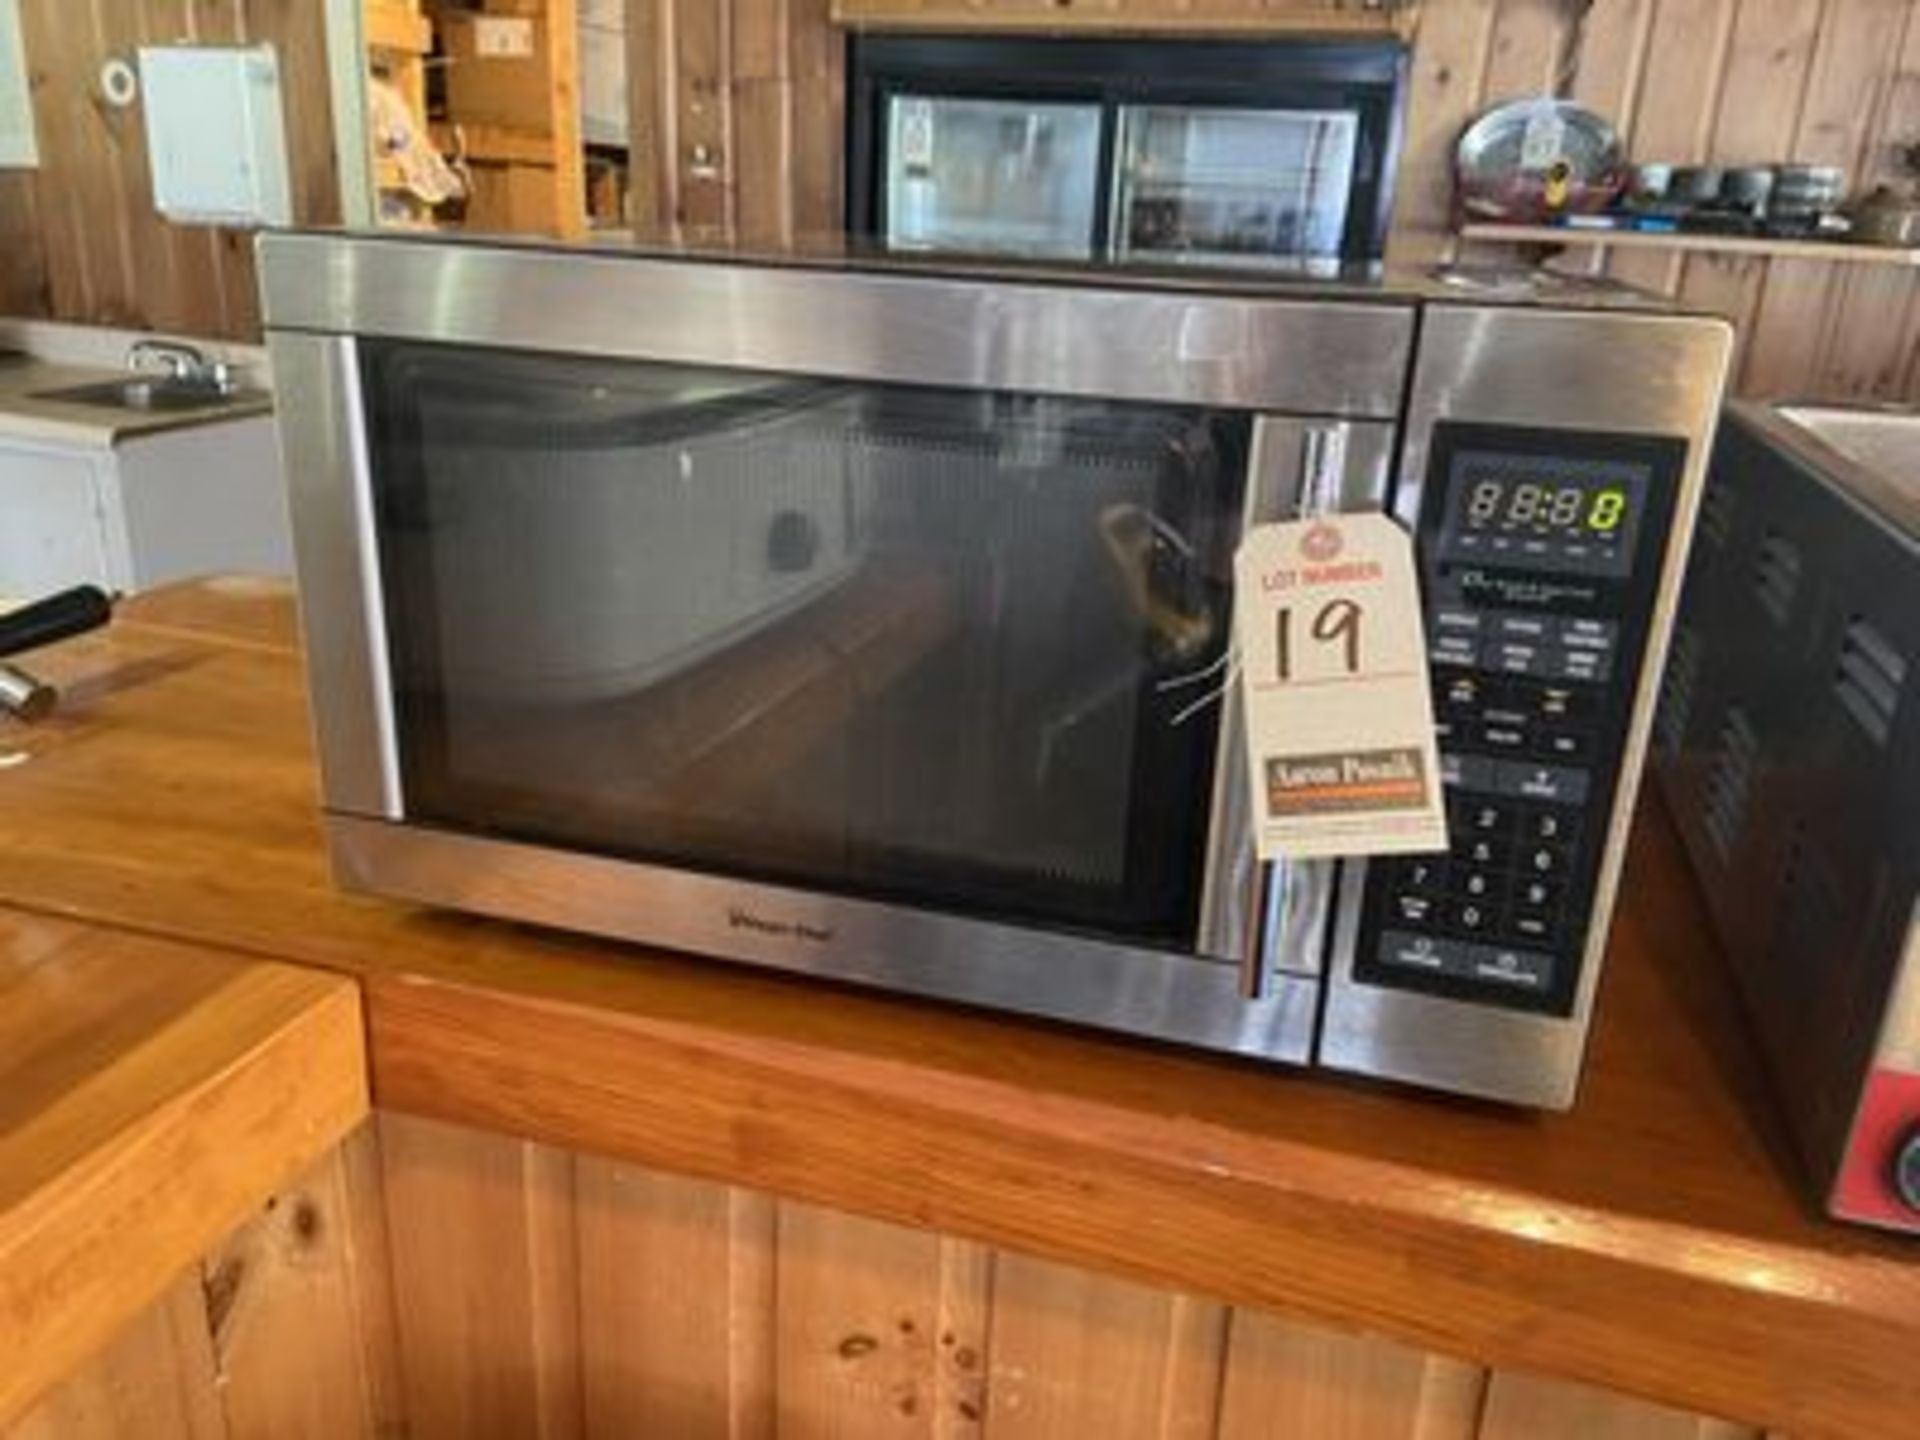 MAGIC CHEF S.S. MICROWAVE OVEN, 115V